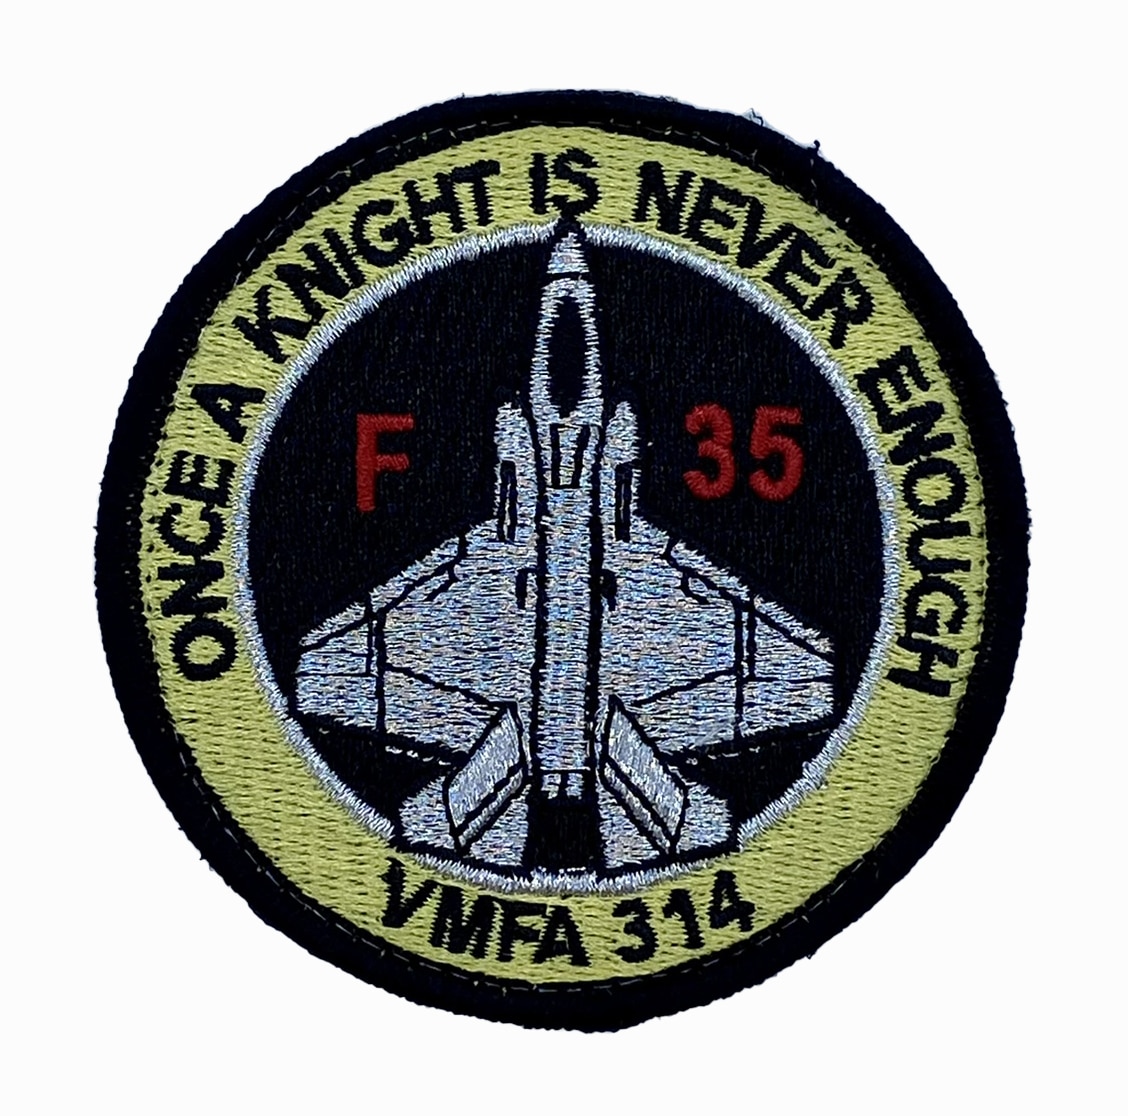 VMFA-314 Black Knights Shoulder Patch – With Hook and Loop